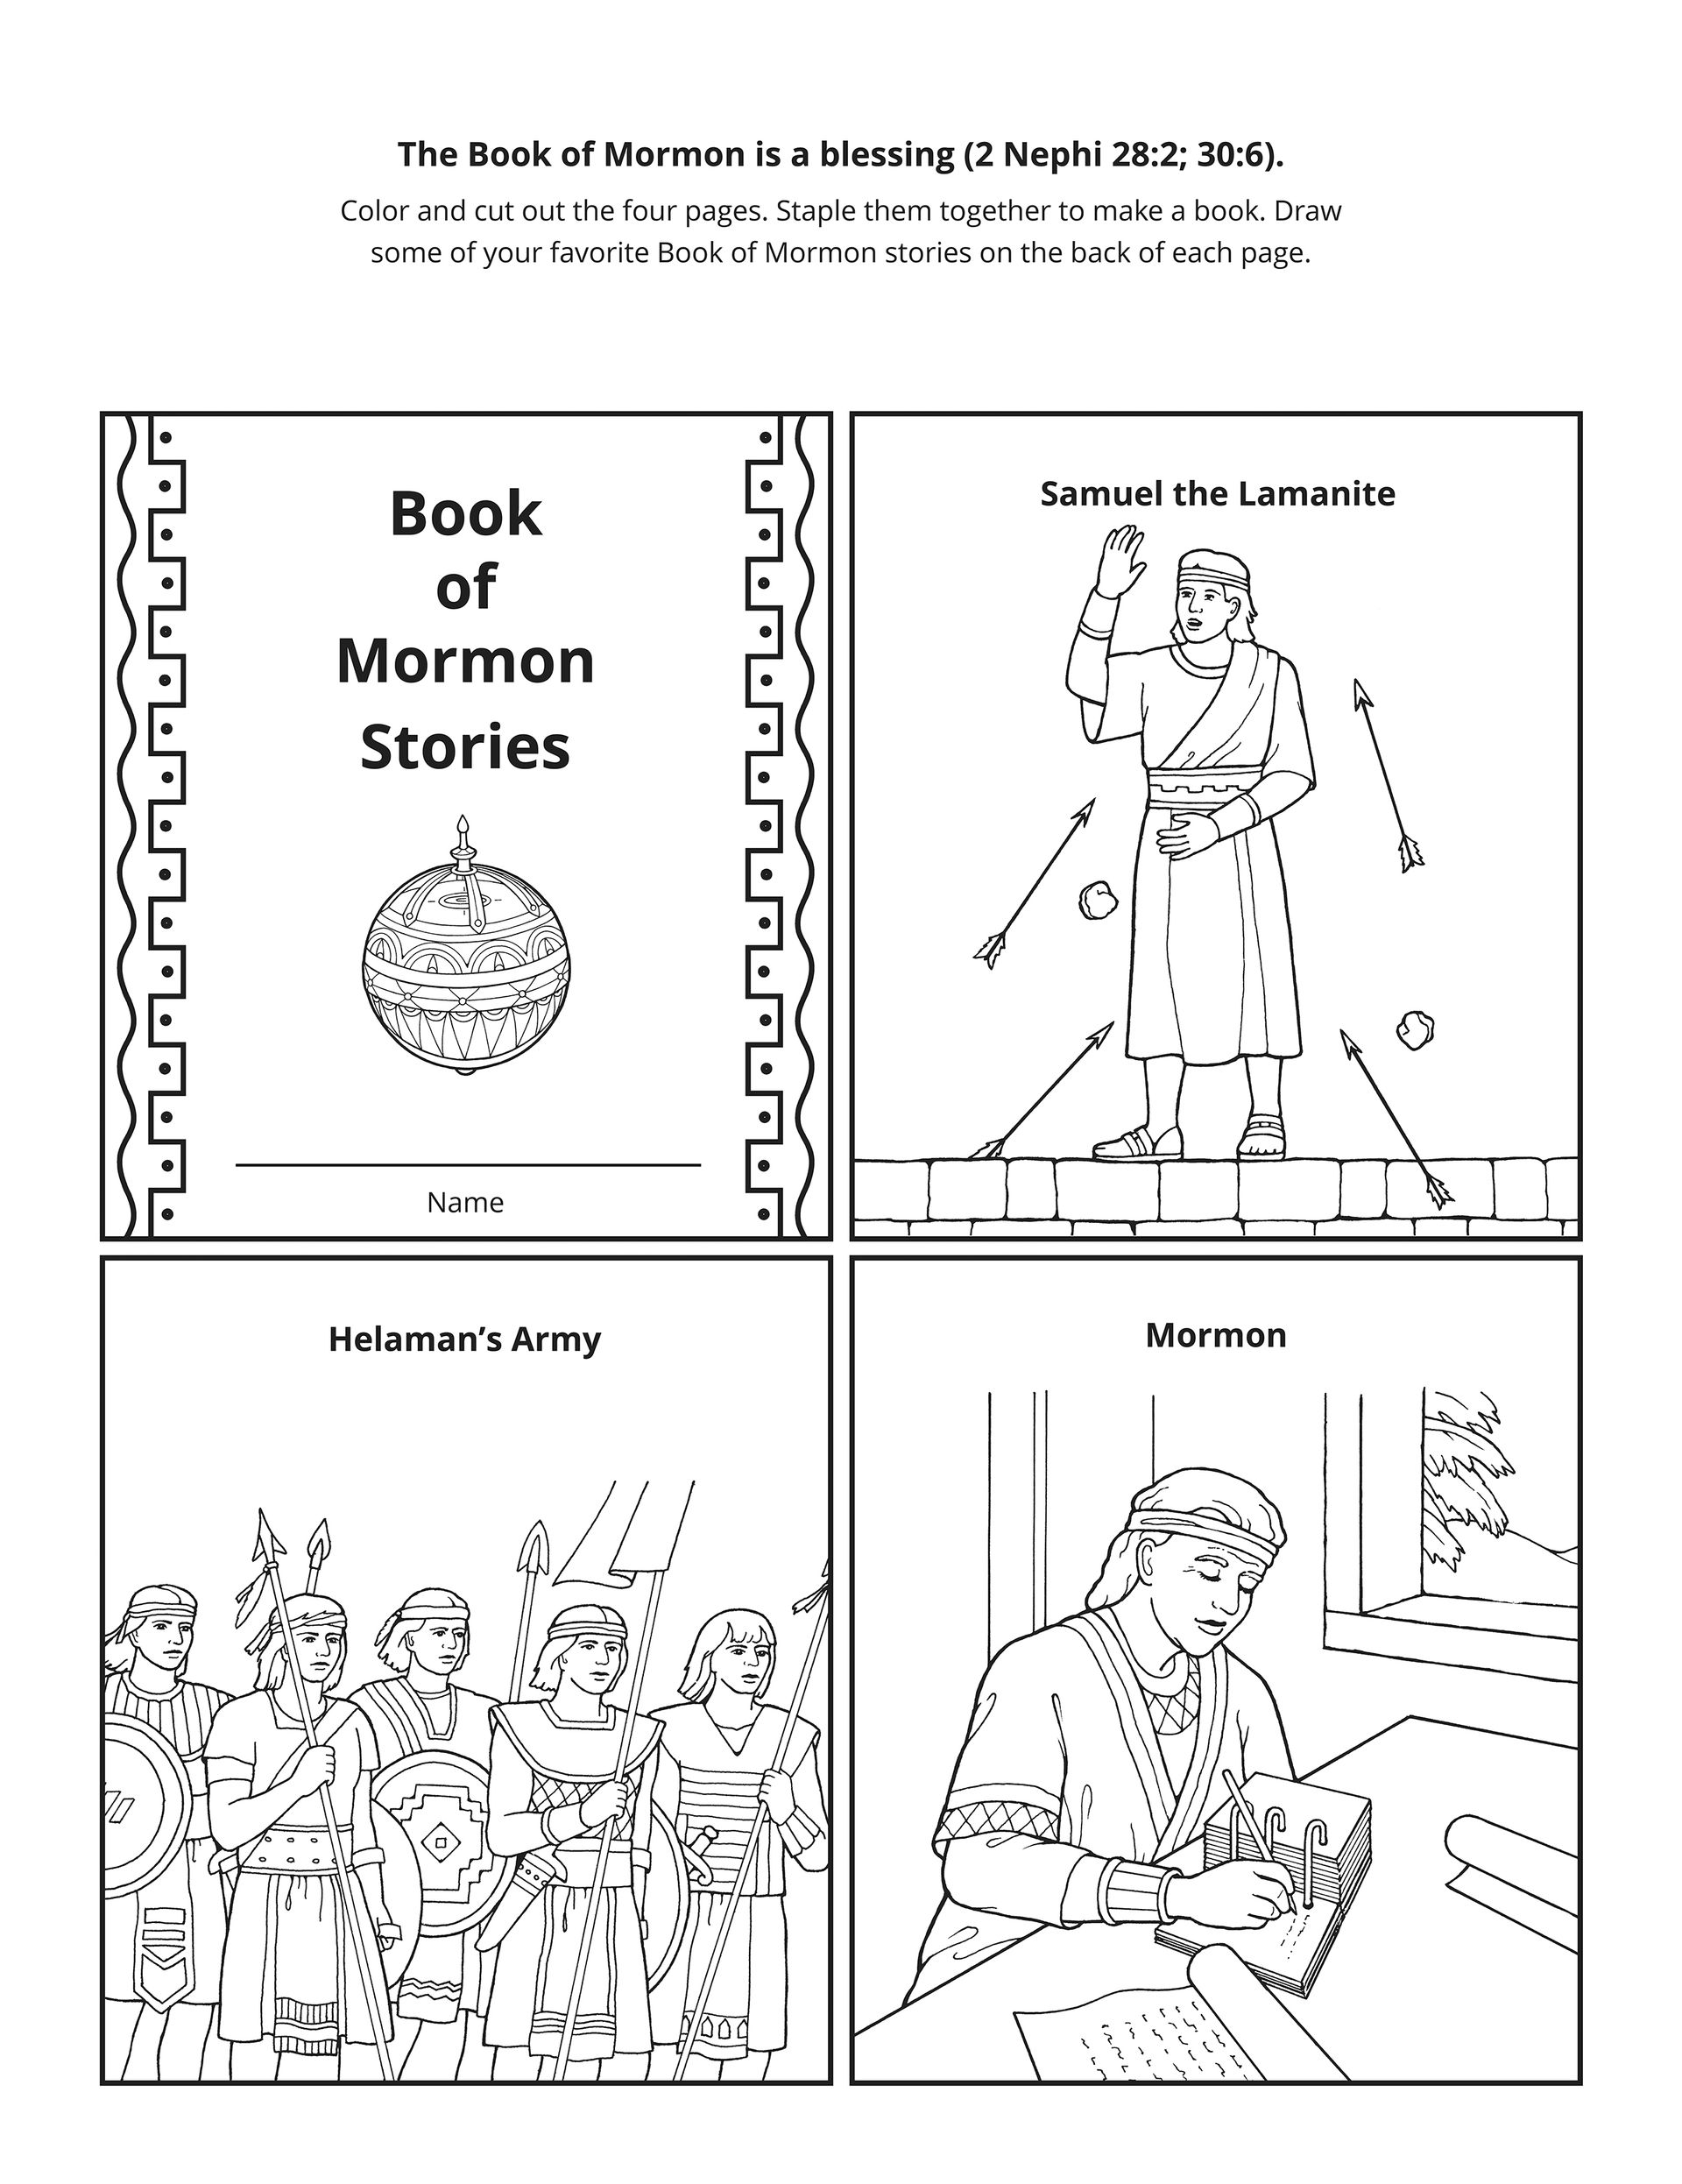 Line art of three key moments in the Book of Mormon.